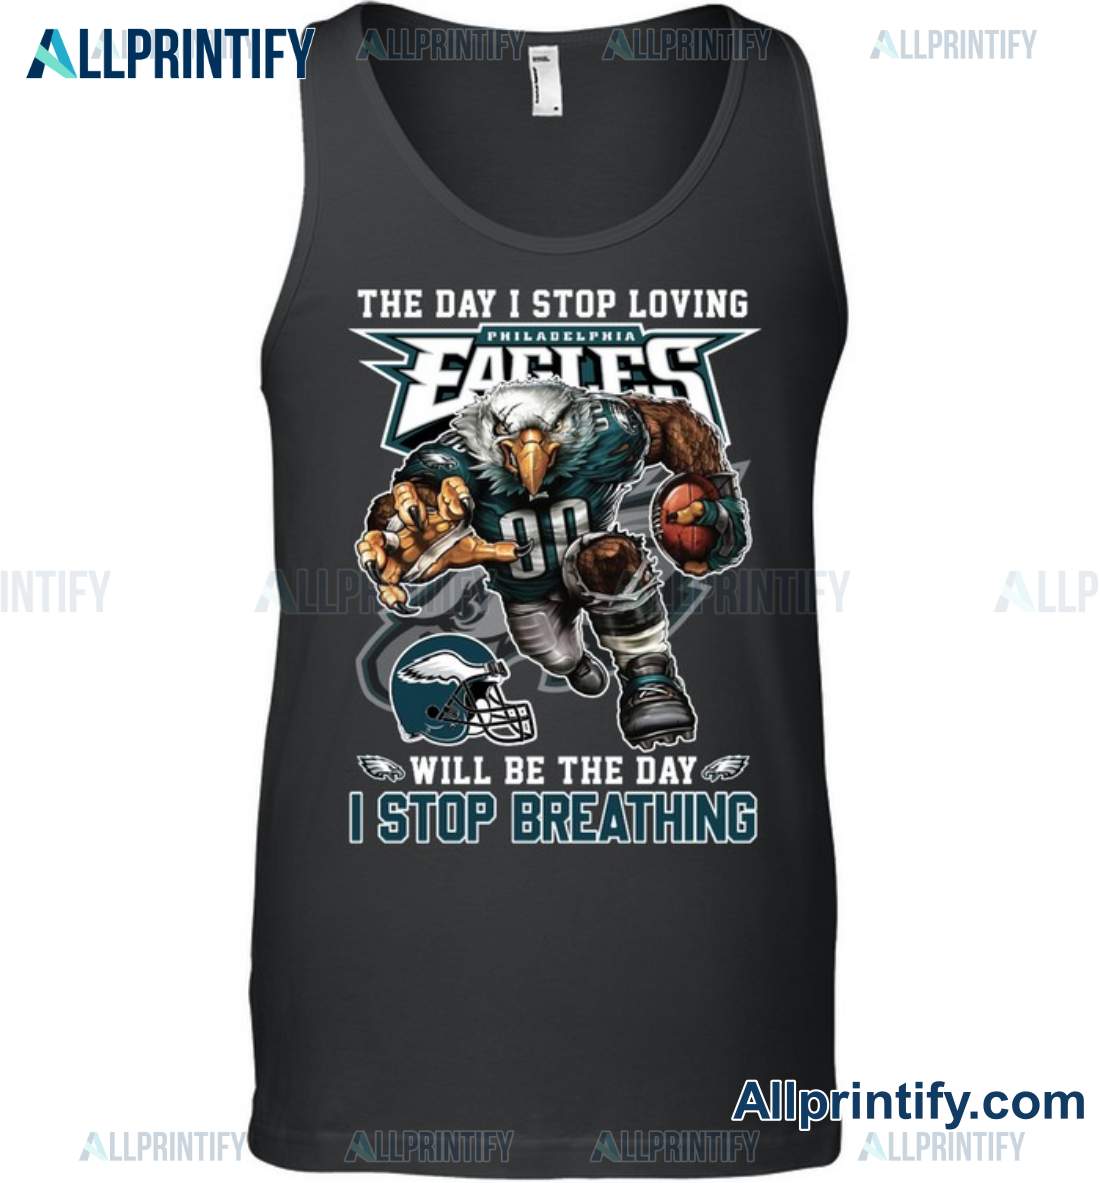 The Day I Stop Loving Philadelphia Eagles Will Be The Day I Stop Breathing Shirt x